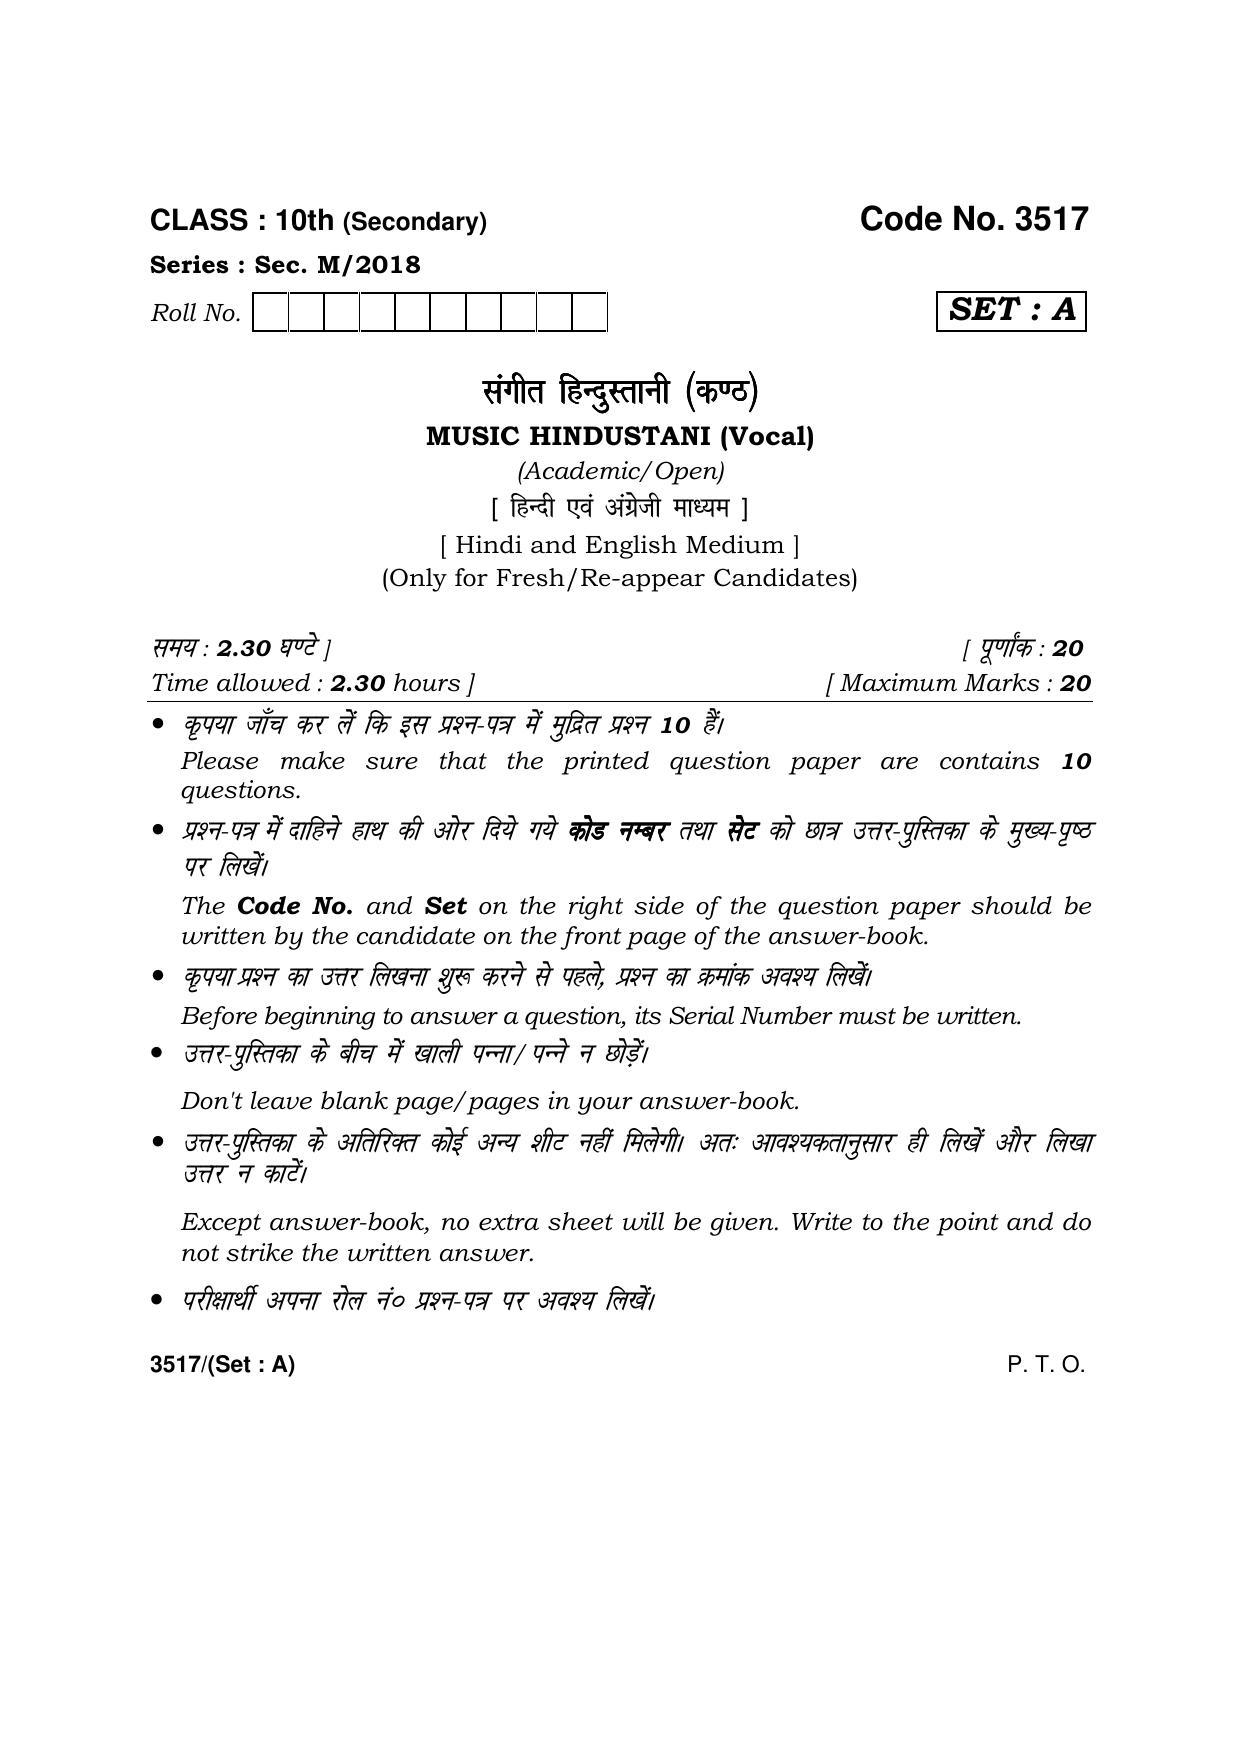 Haryana Board HBSE Class 10 Music Hindustani (Vocal) -A 2018 Question Paper - Page 1